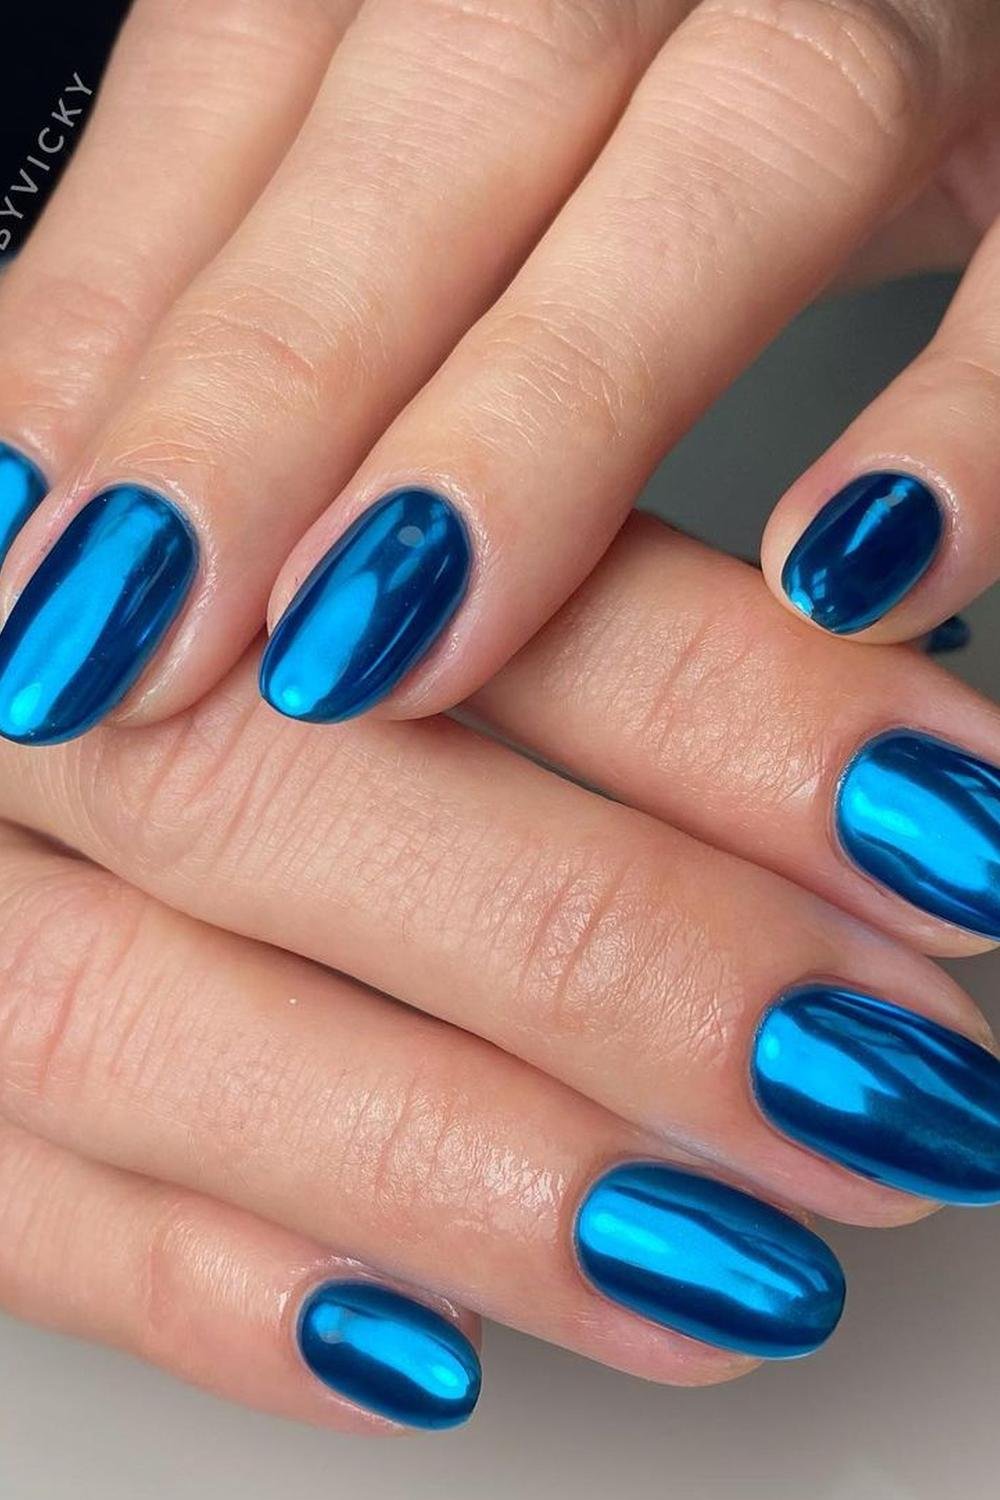 24 - Picture of Blue Chrome Nails